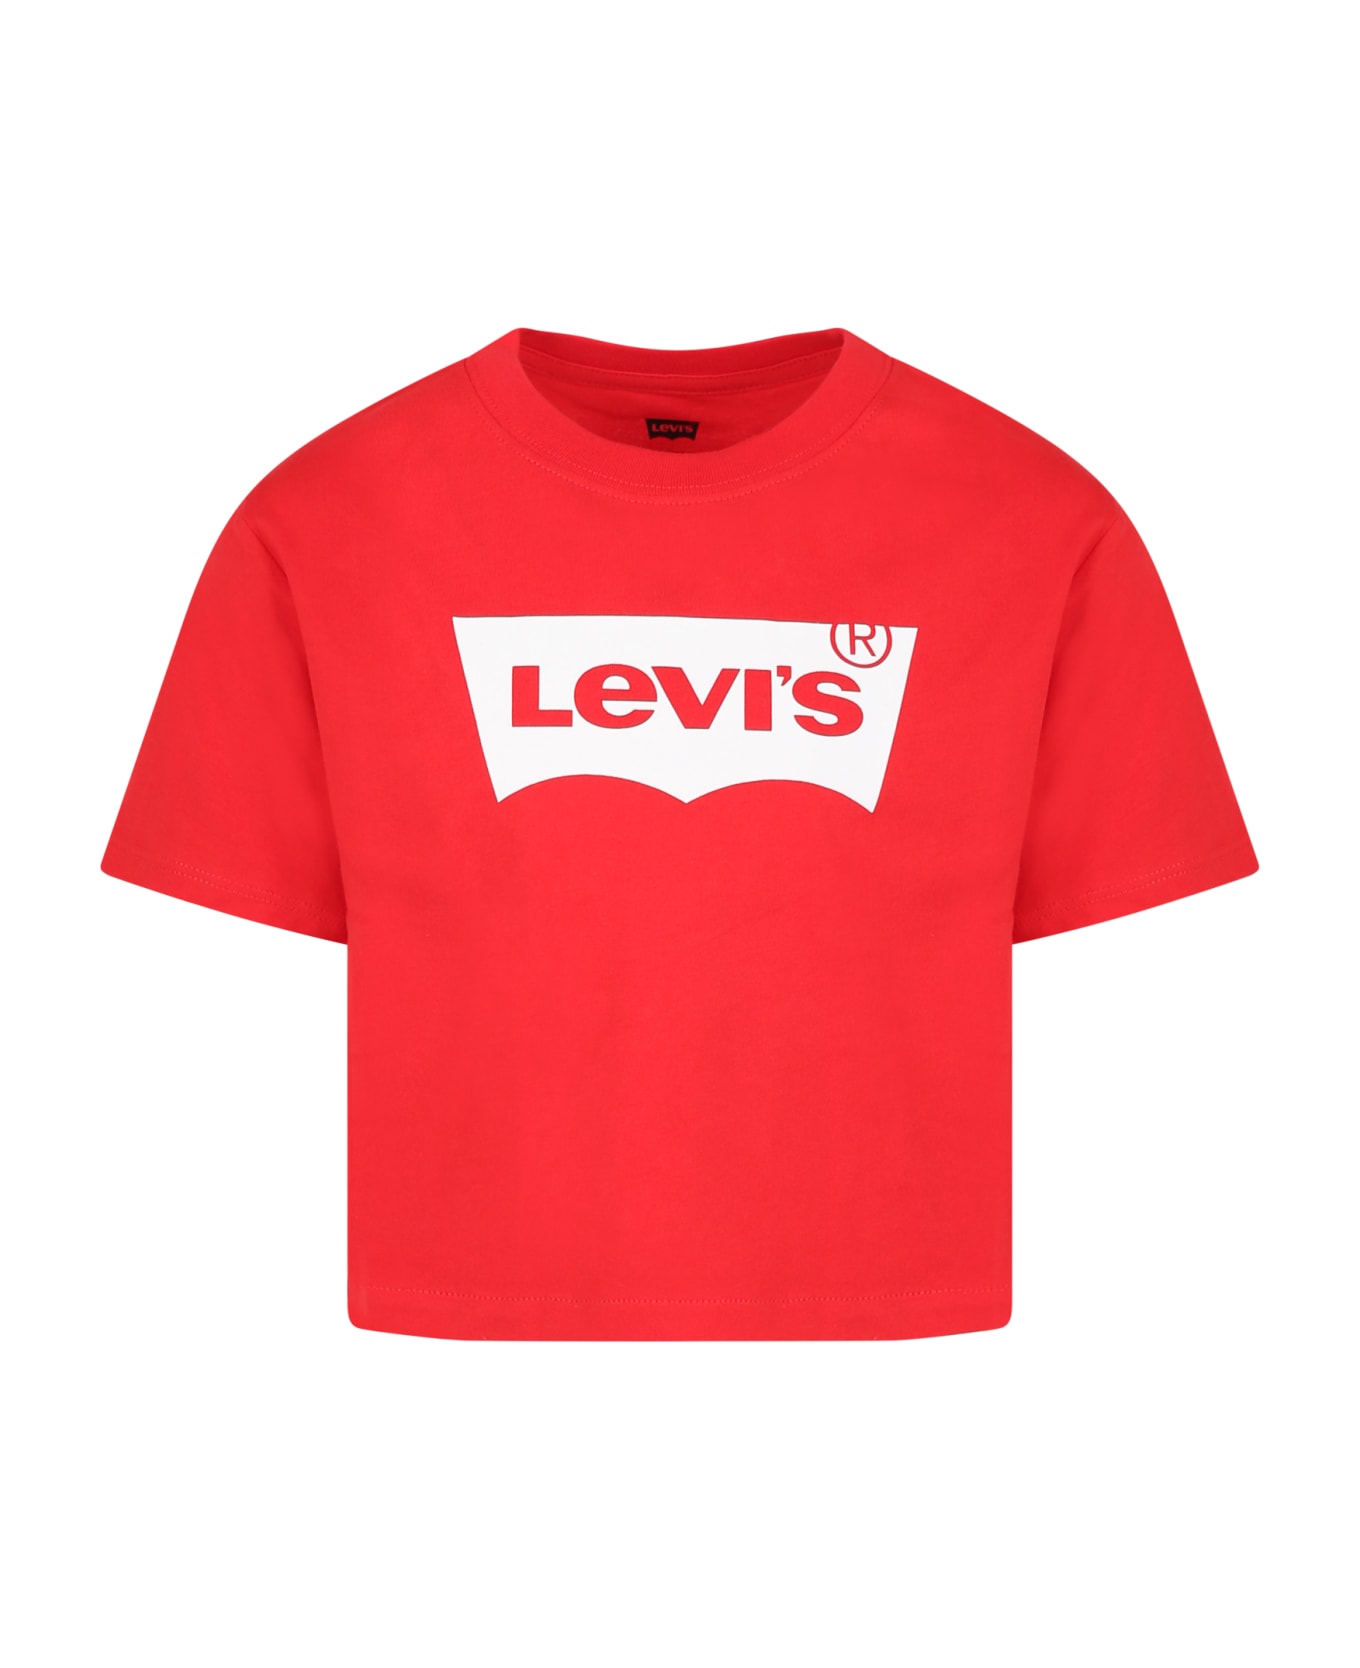 Levi's Red T-shirt For Girl With White Logo Print - Red